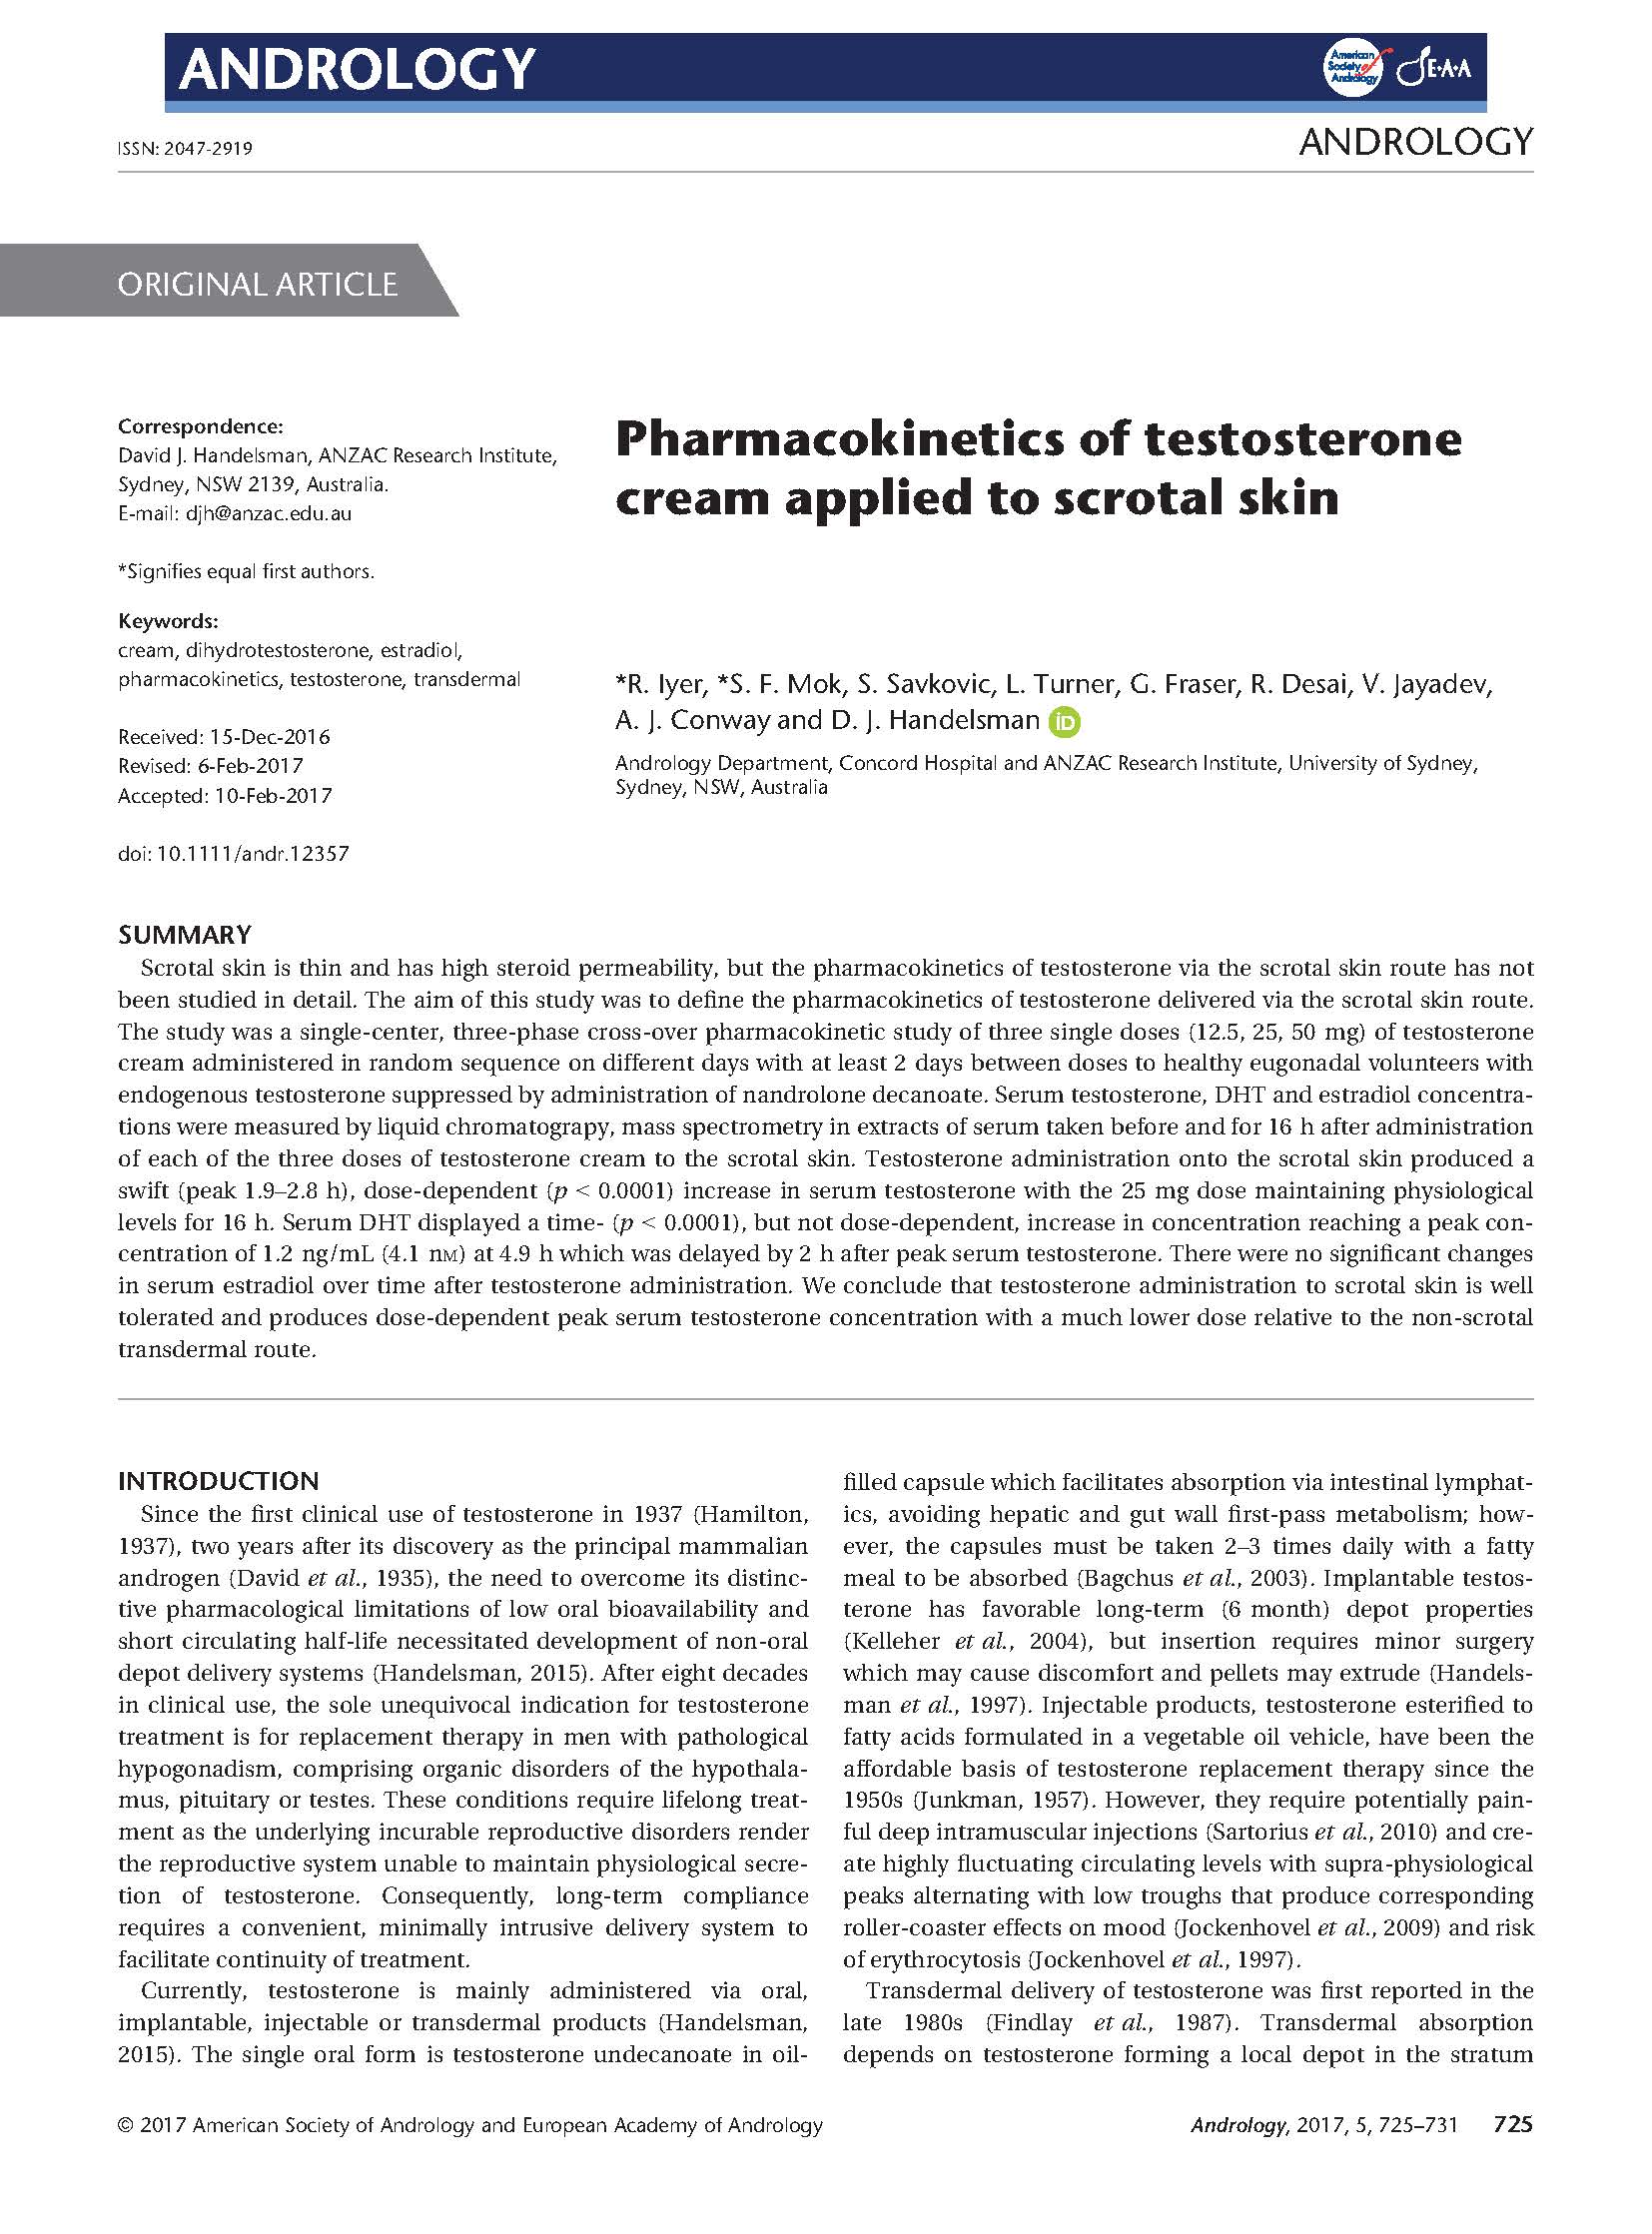 Pharmacokinetics of testosterone cream applied to scrotal skin.